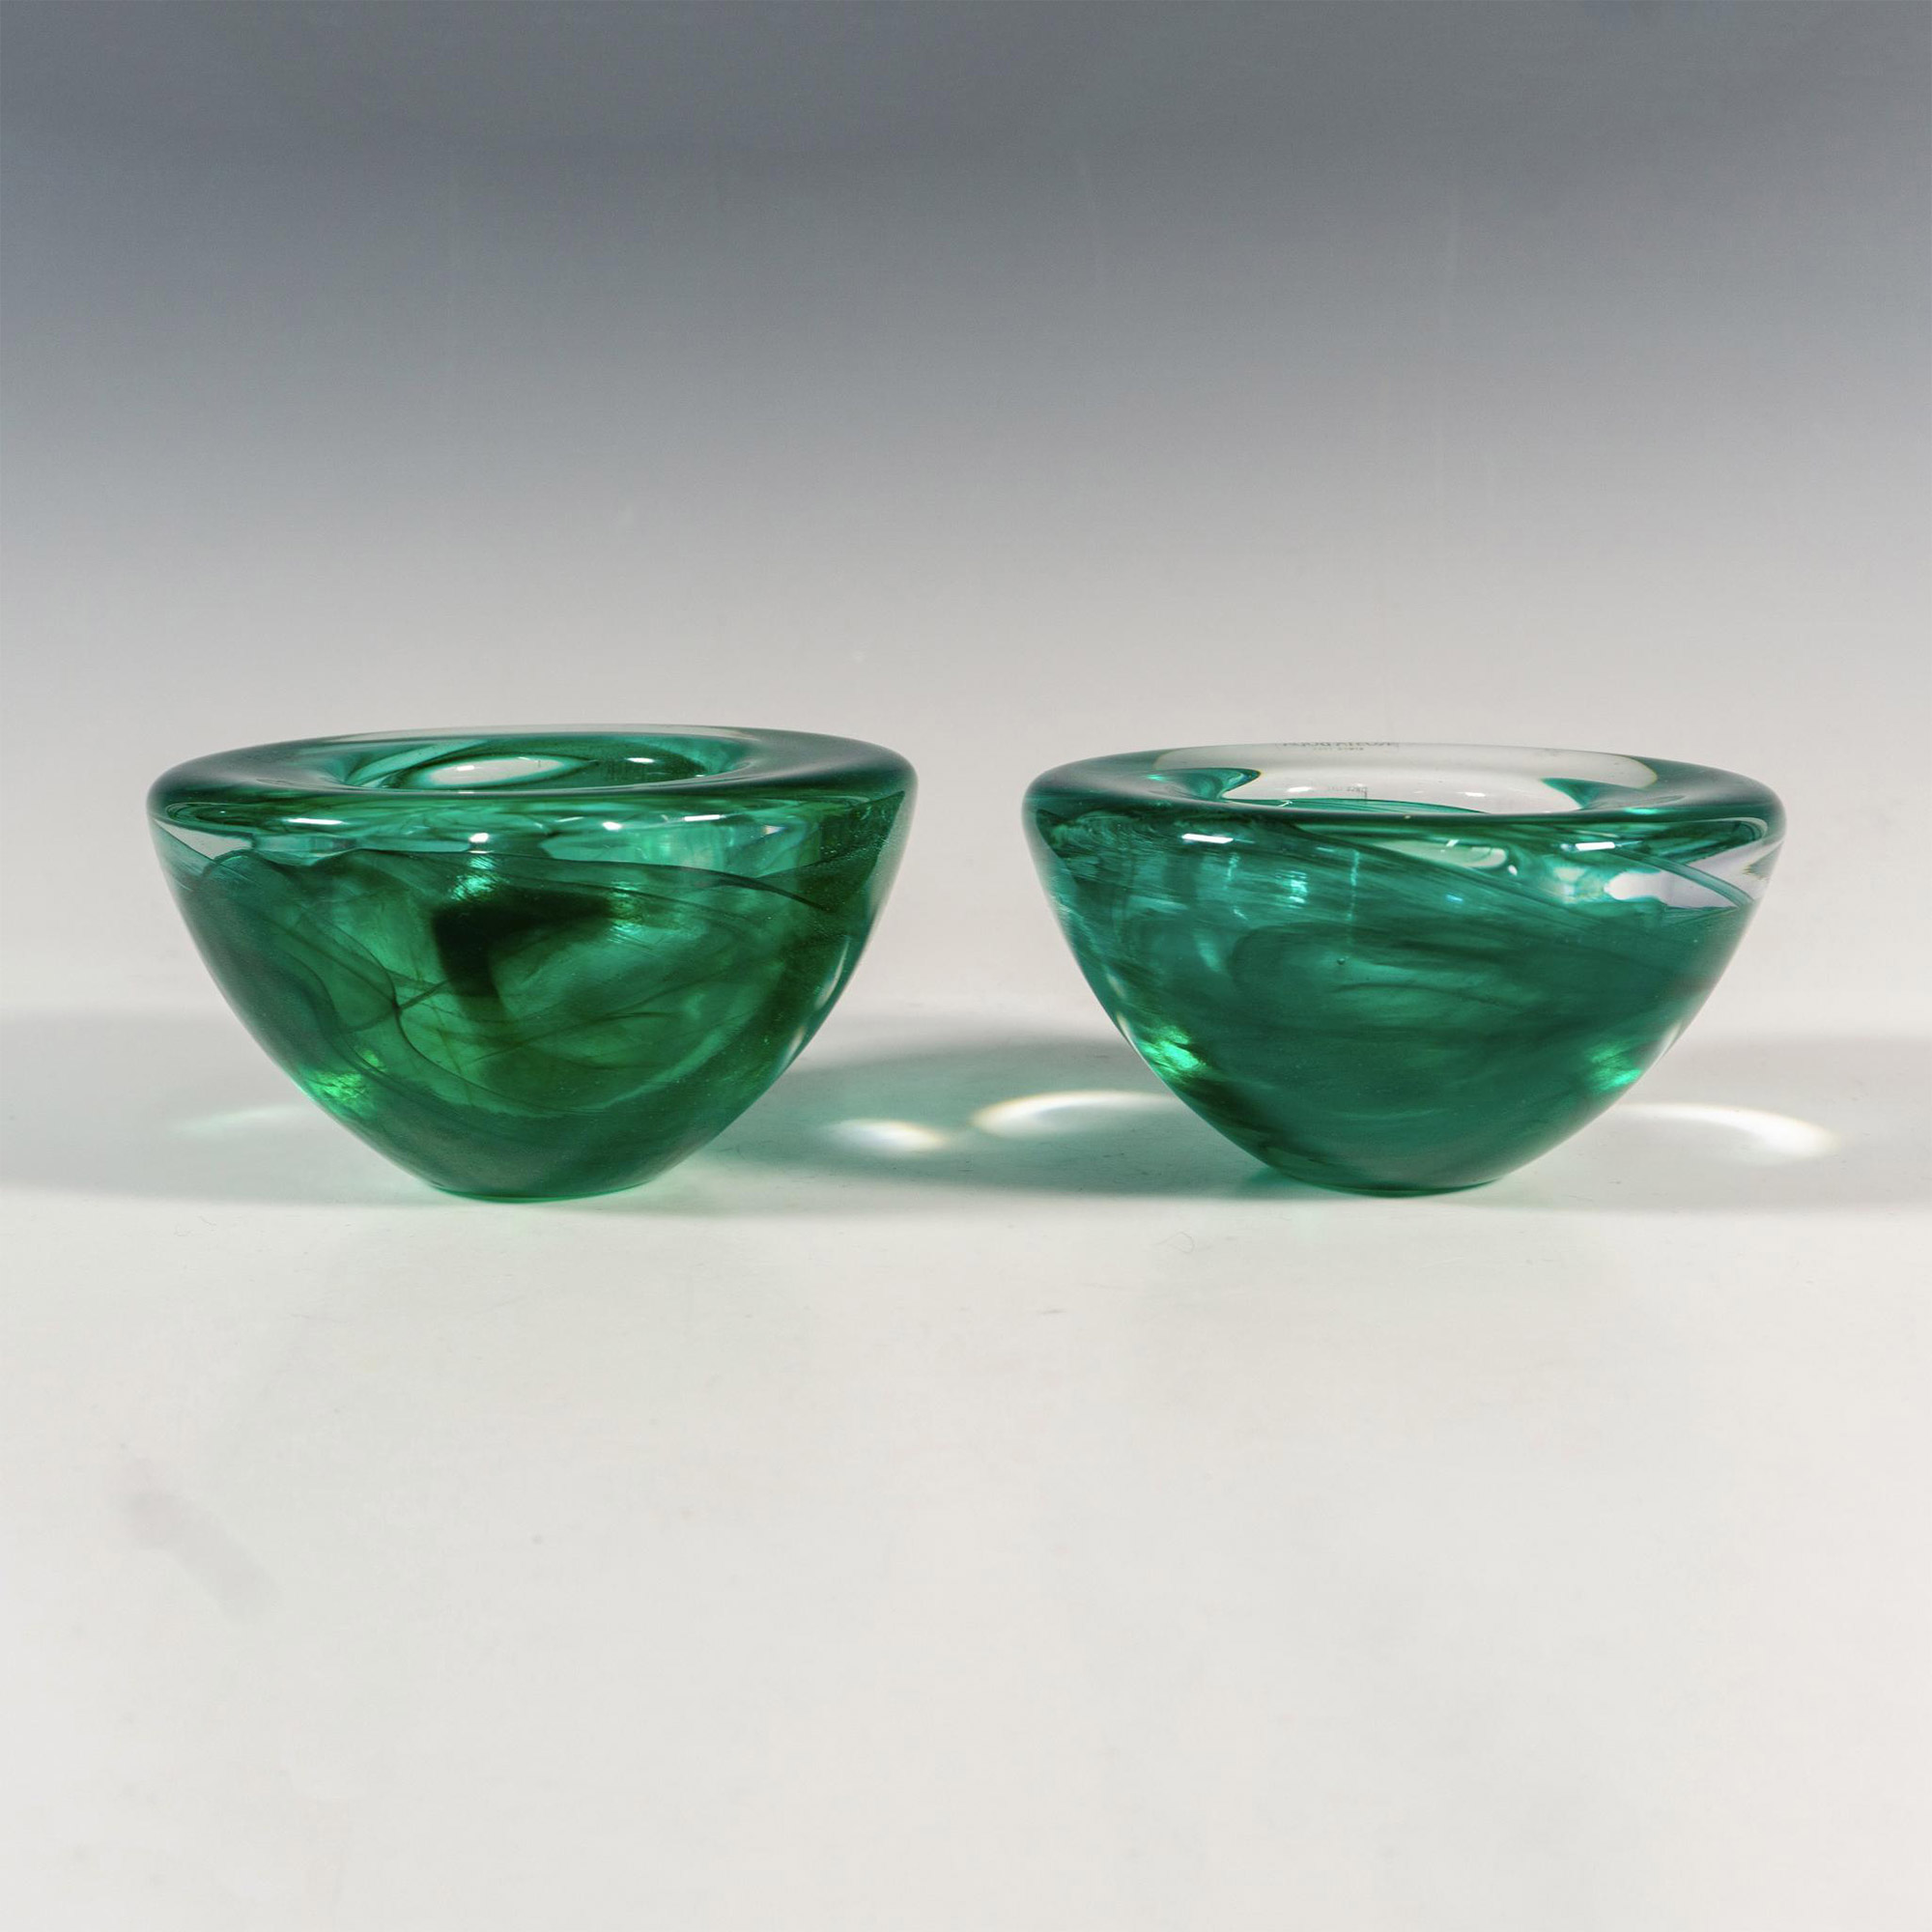 Pair of Kosta Boda by Anna Ehrner Candle Holders, Atoll - Image 3 of 7